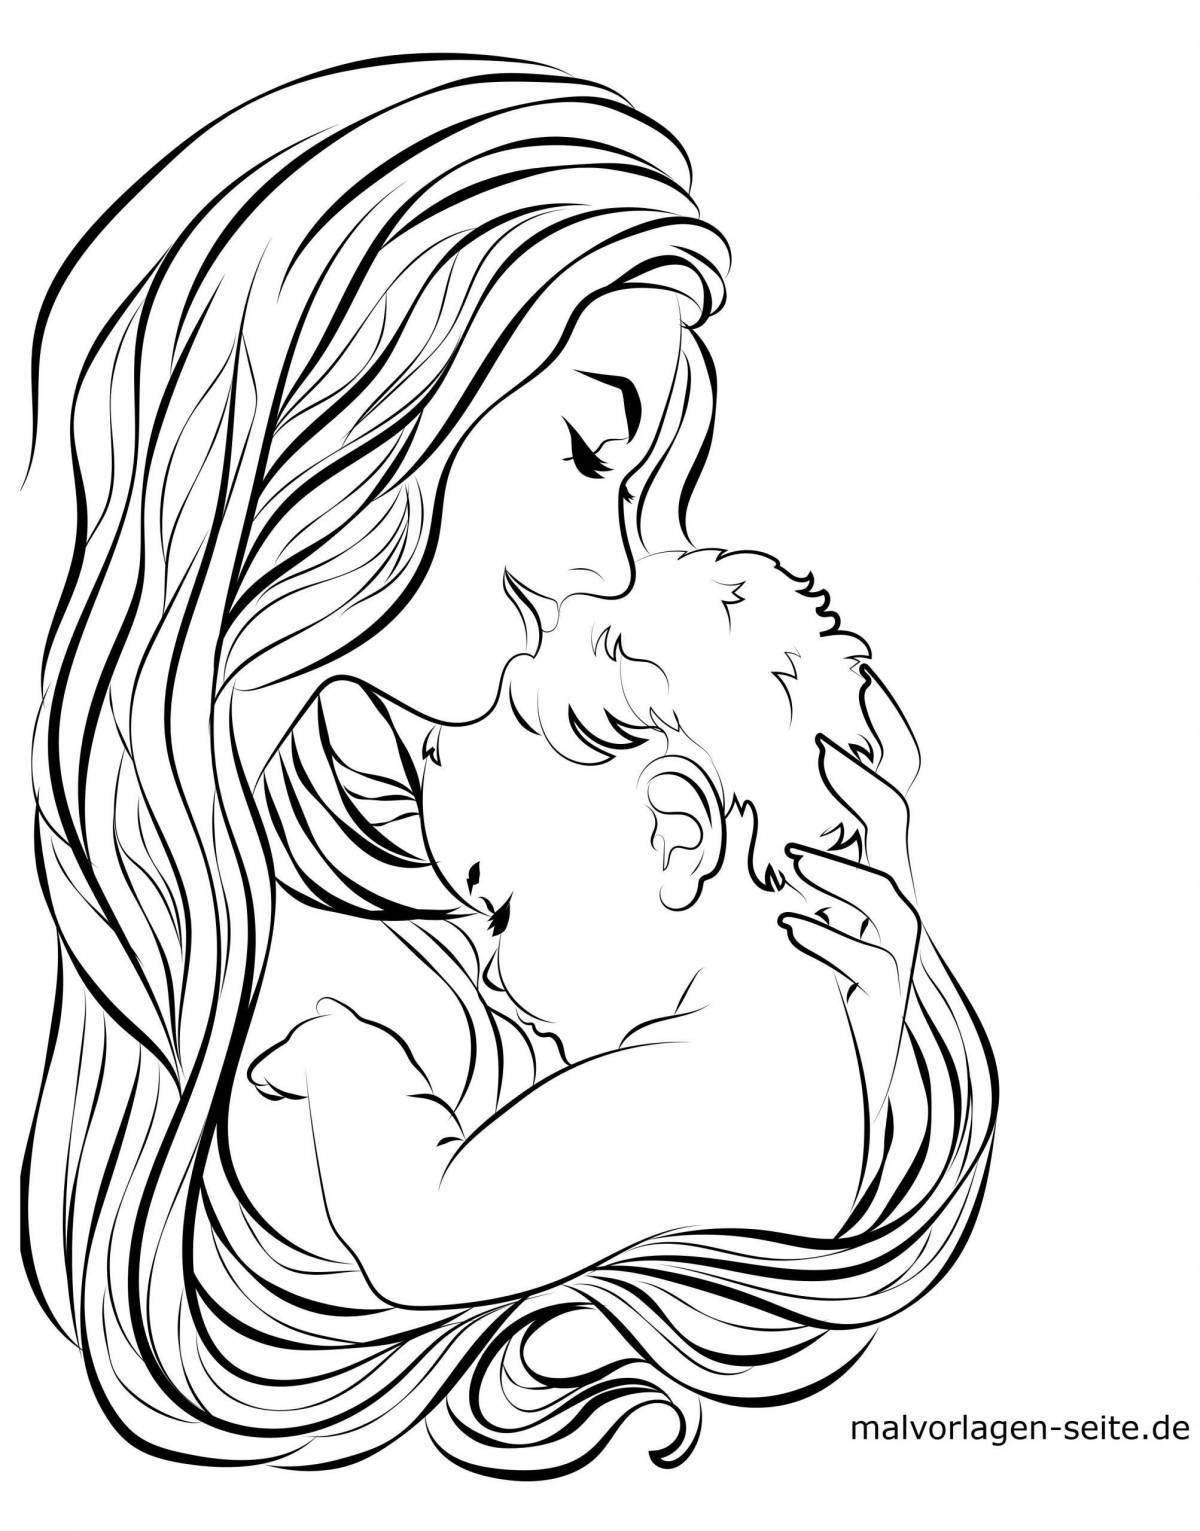 Inspirational mother and child coloring book